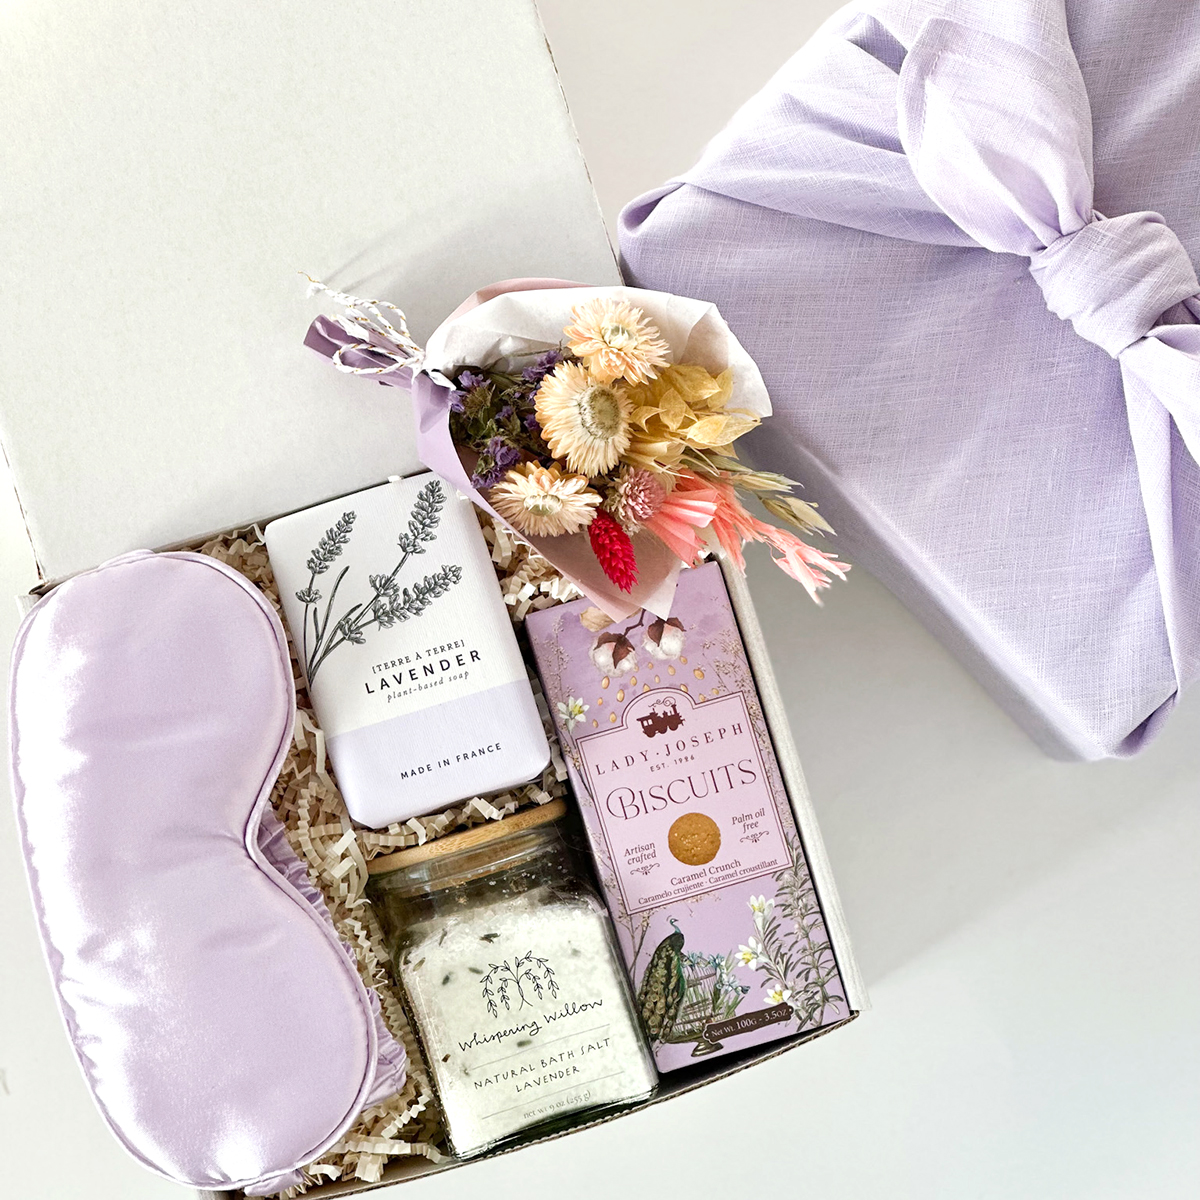 KADOO’s Curated Gift Boxes